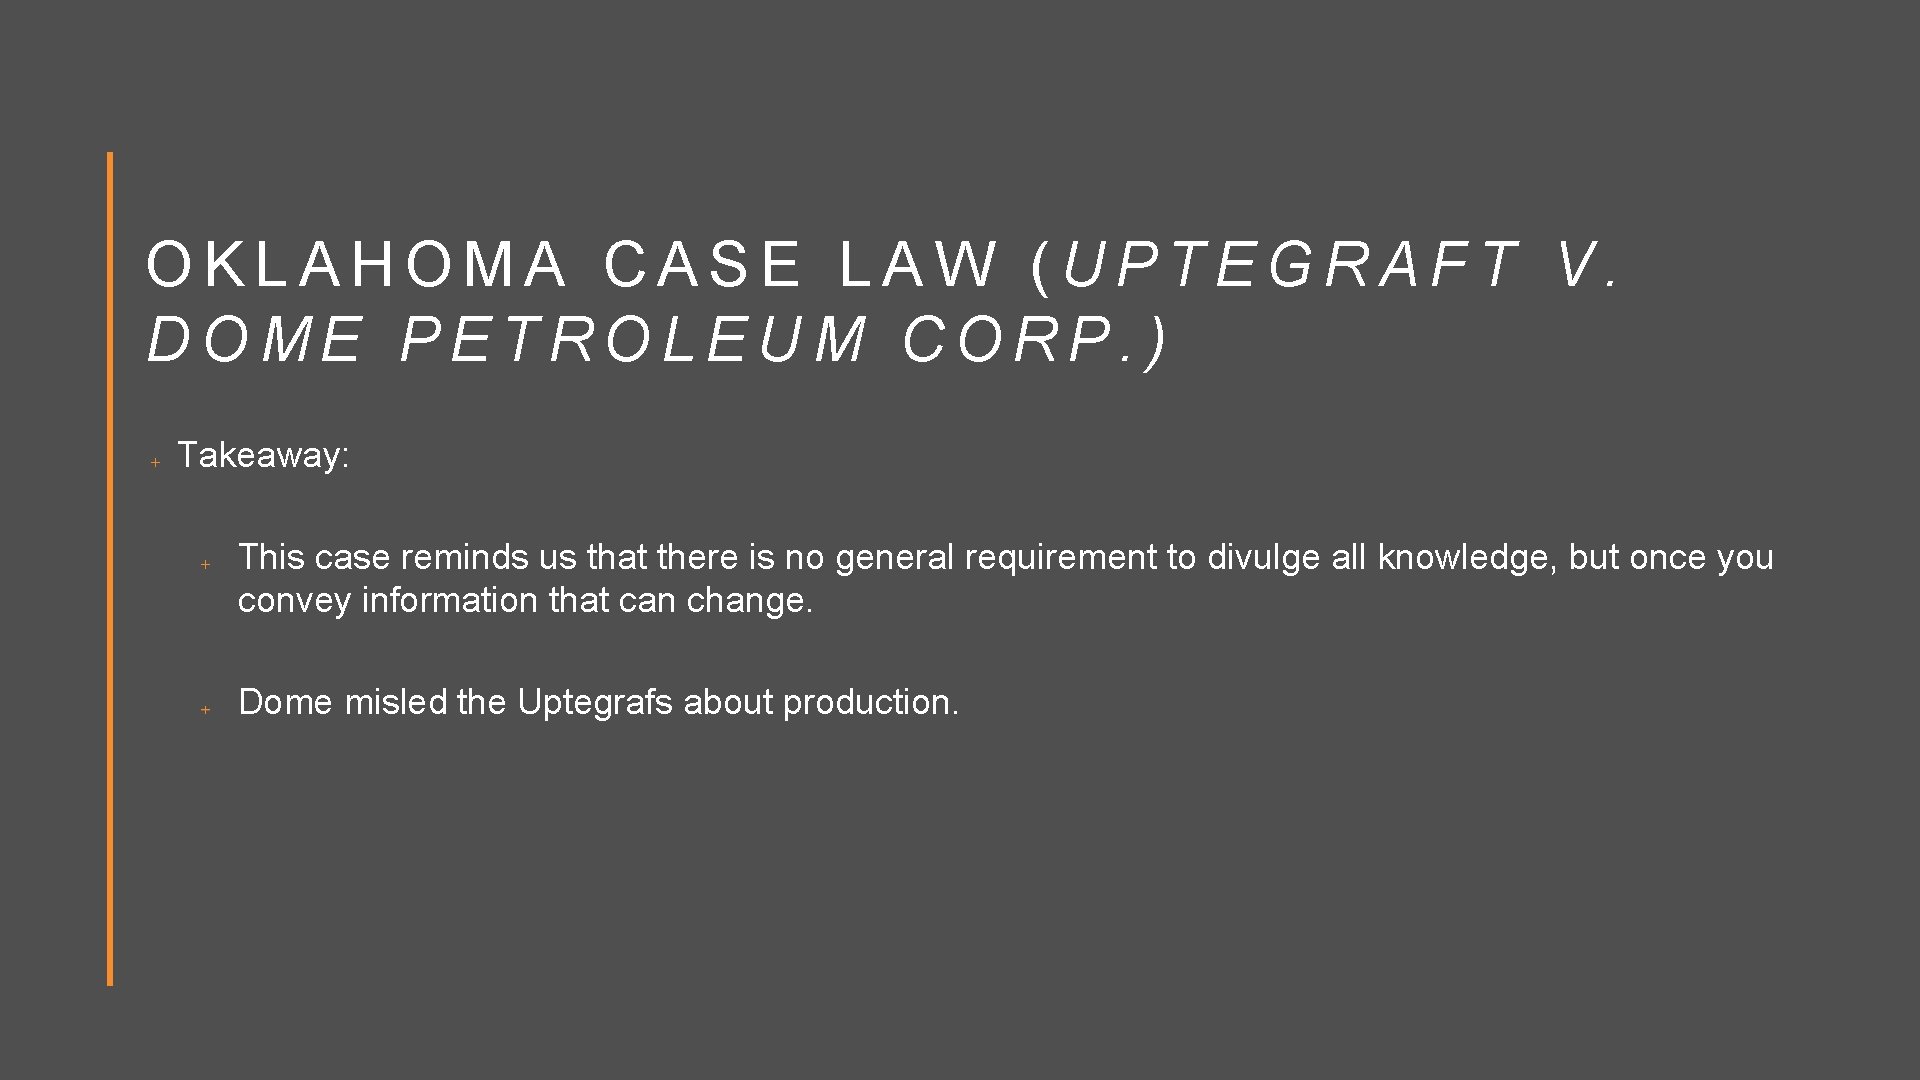 OKLAHOMA CASE LAW (UPTEGRAFT V. DOME PETROLEUM CORP. ) Takeaway: This case reminds us